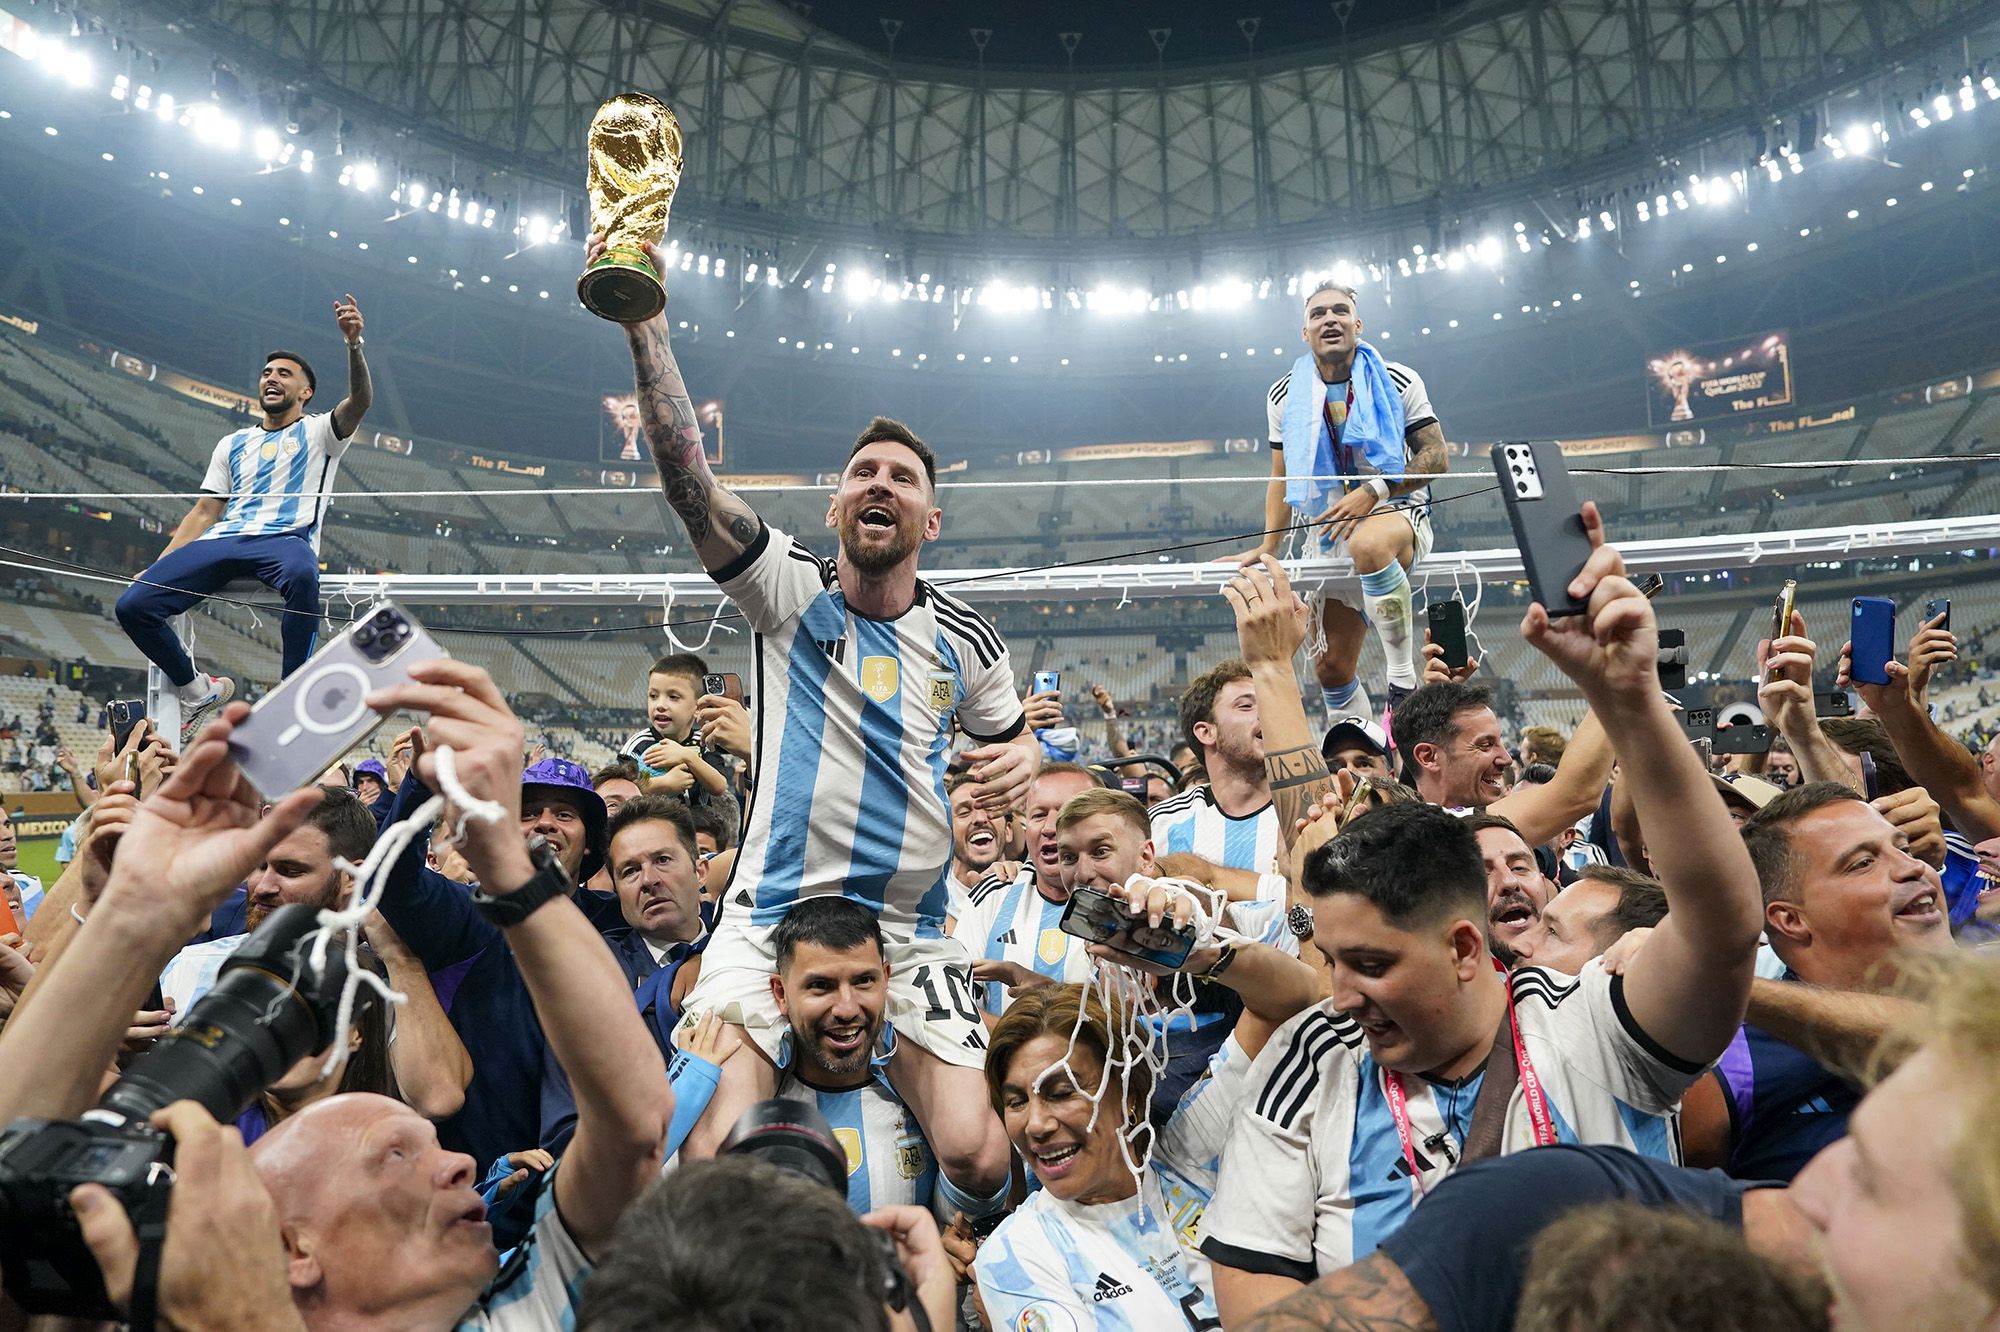 Wrold Saxi Videos - The best photos of the 2022 World Cup | CNN